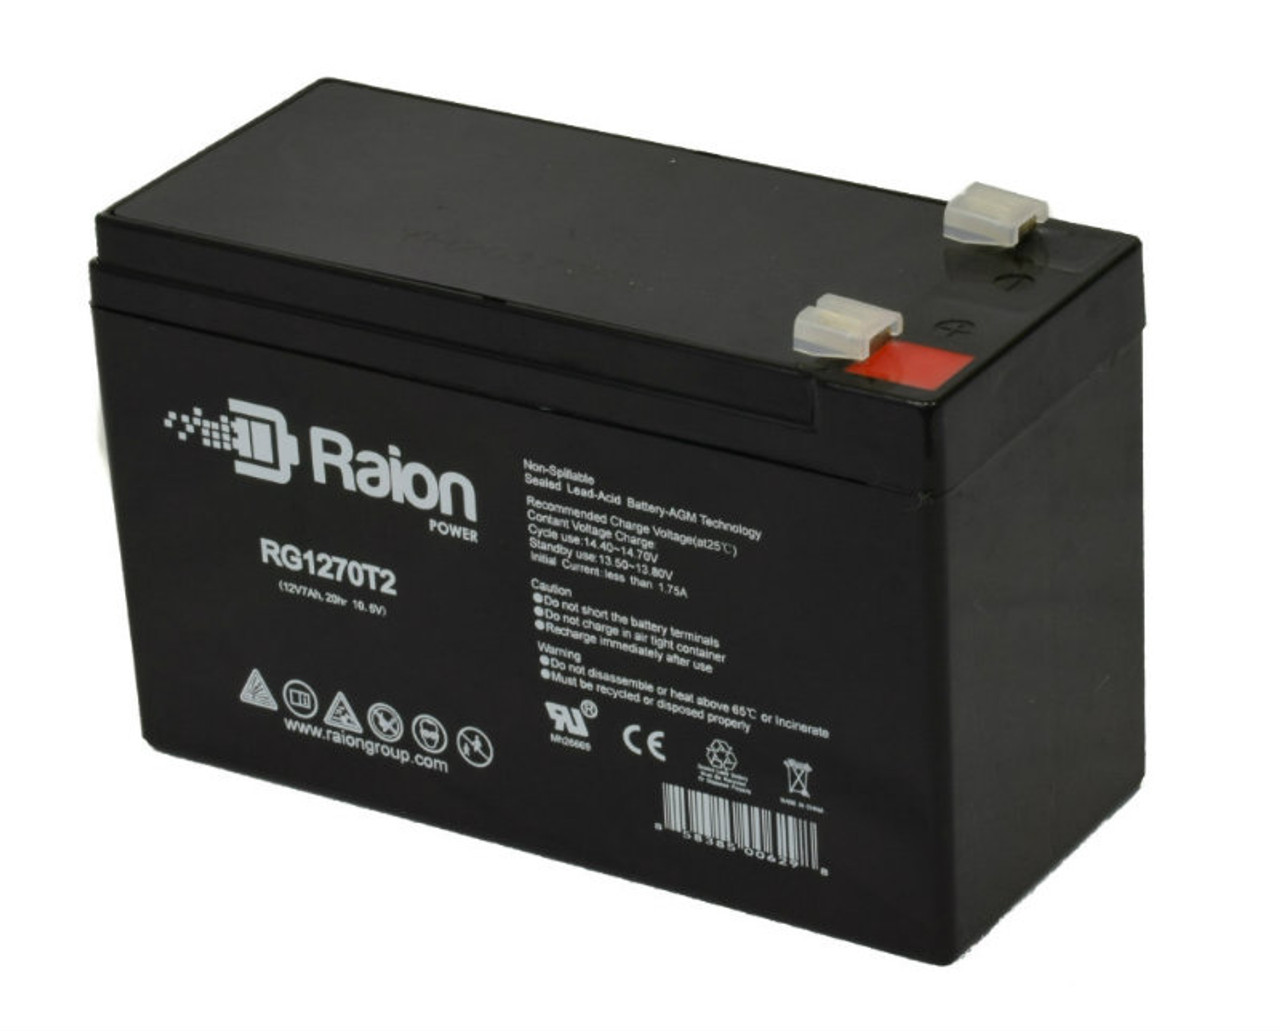 Raion Power RG1270T1 12V 7Ah Non-Spillable Replacement Battery for Vision CP1272 F1